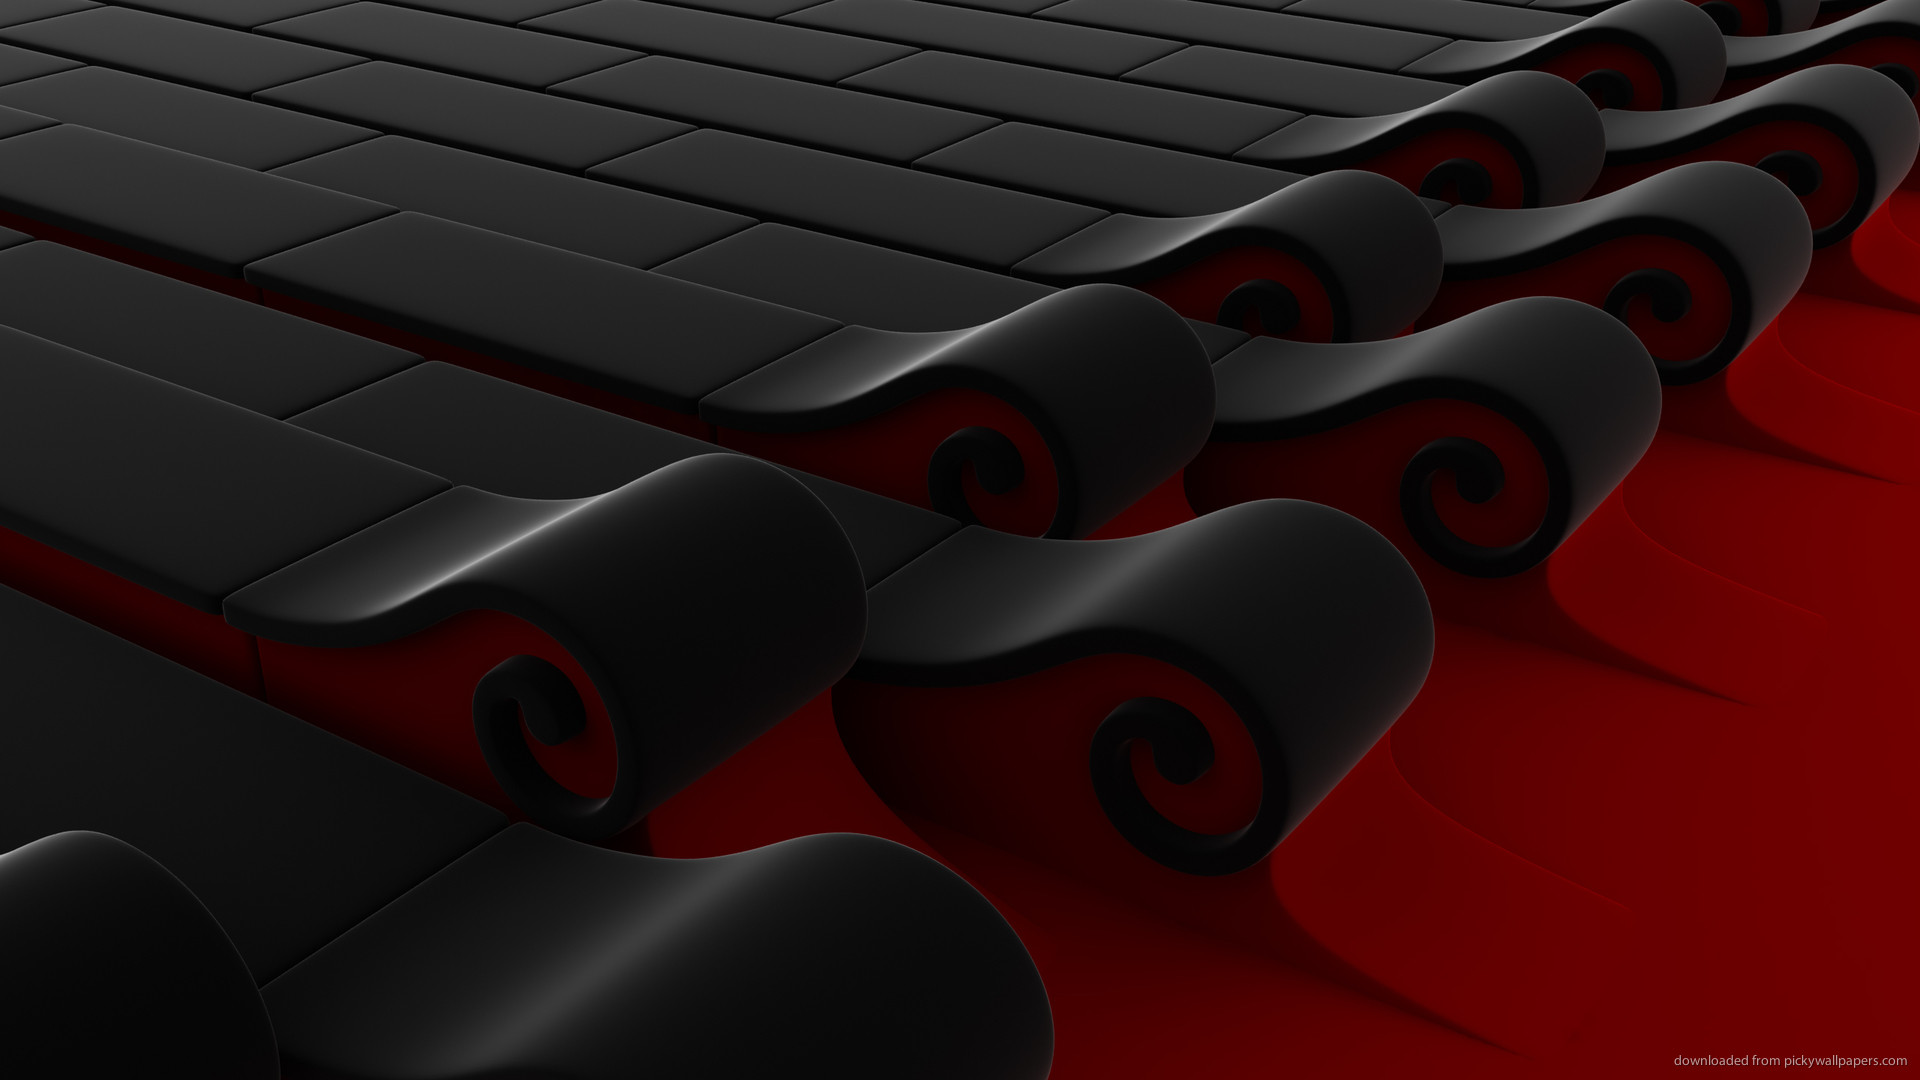 1920x1080 Black and Red Waves render for 